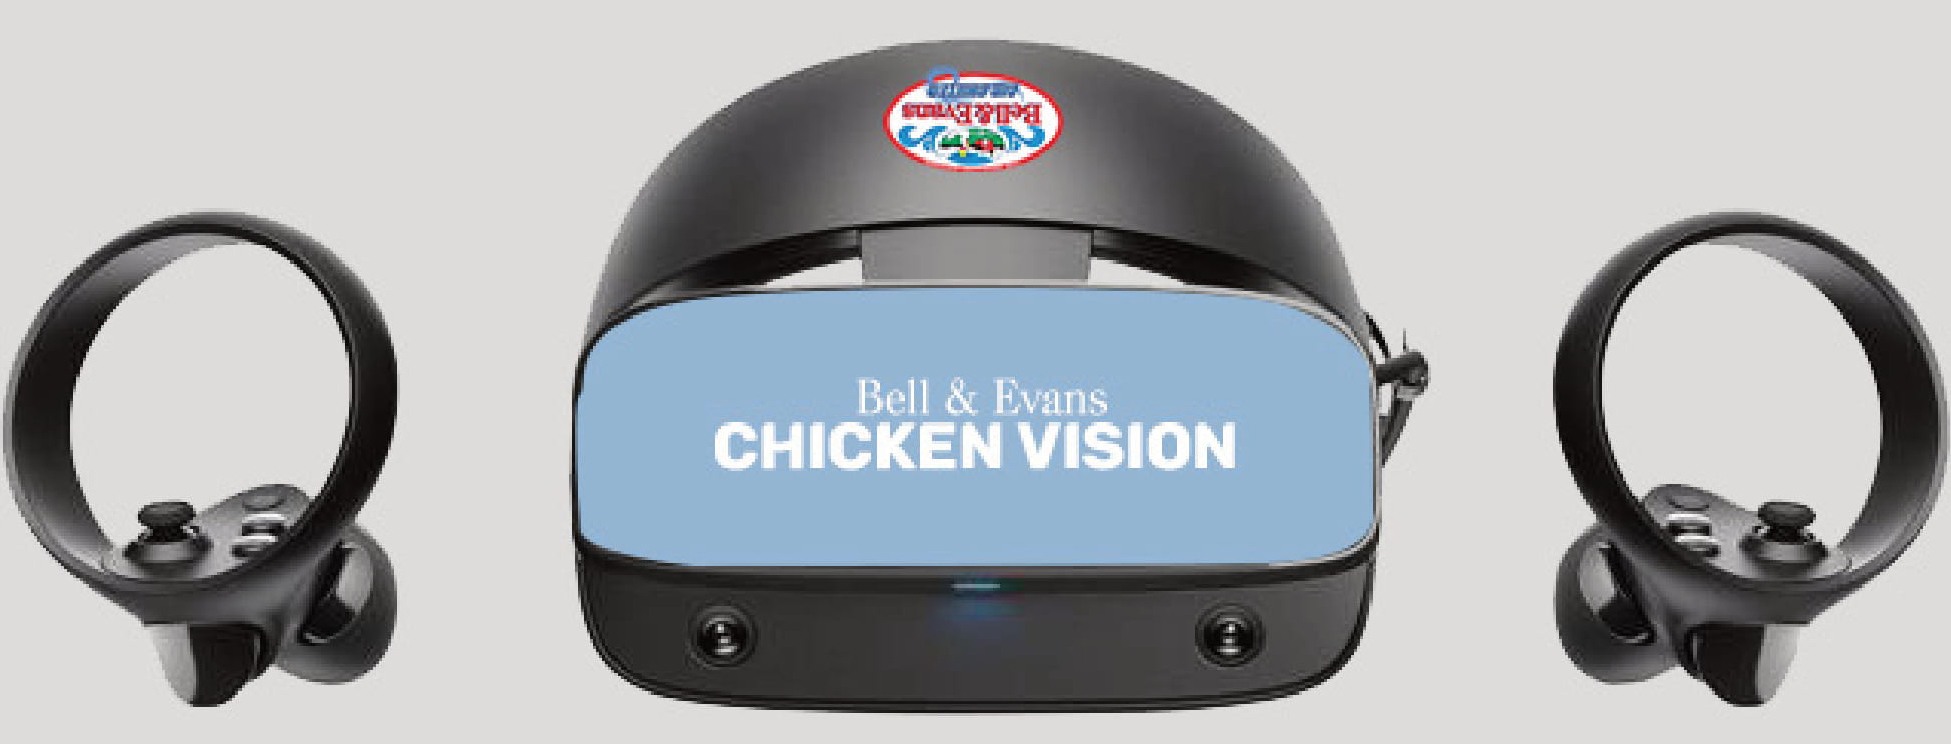 A ChickenVision headset.